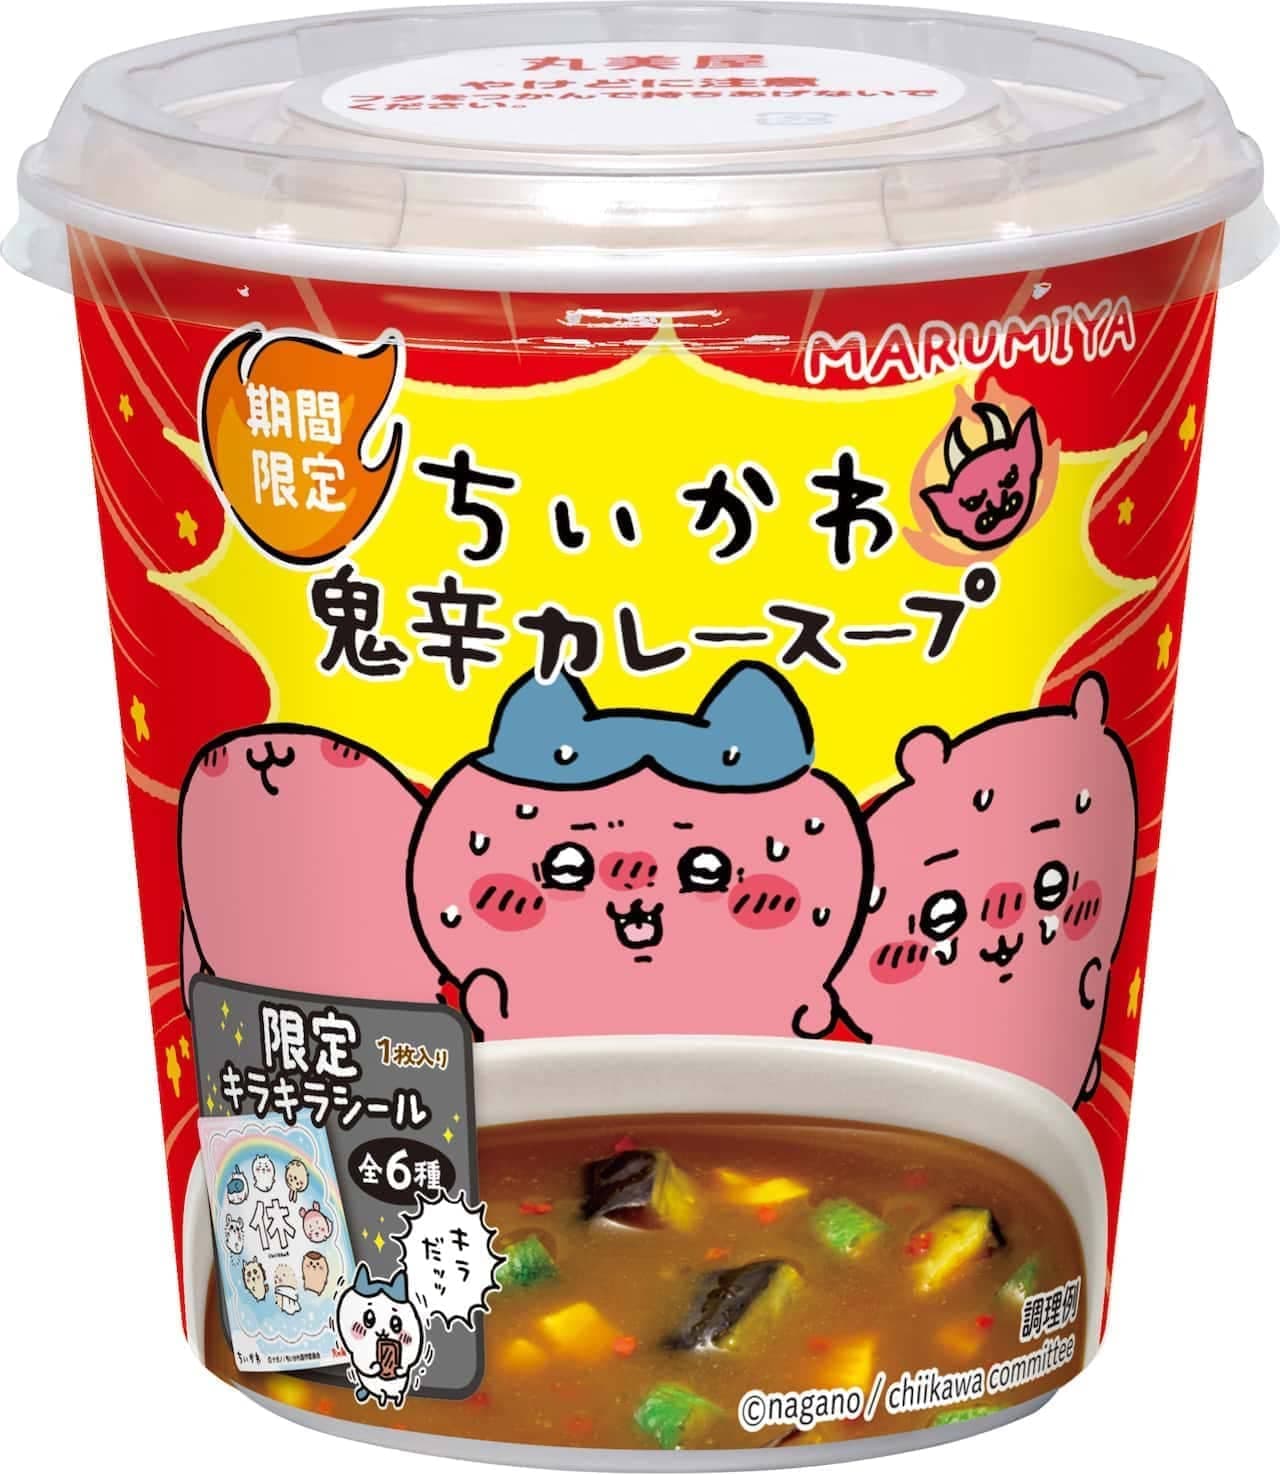 Limited time only Cheekawa Cup Soup [Devil Spicy Curry Soup